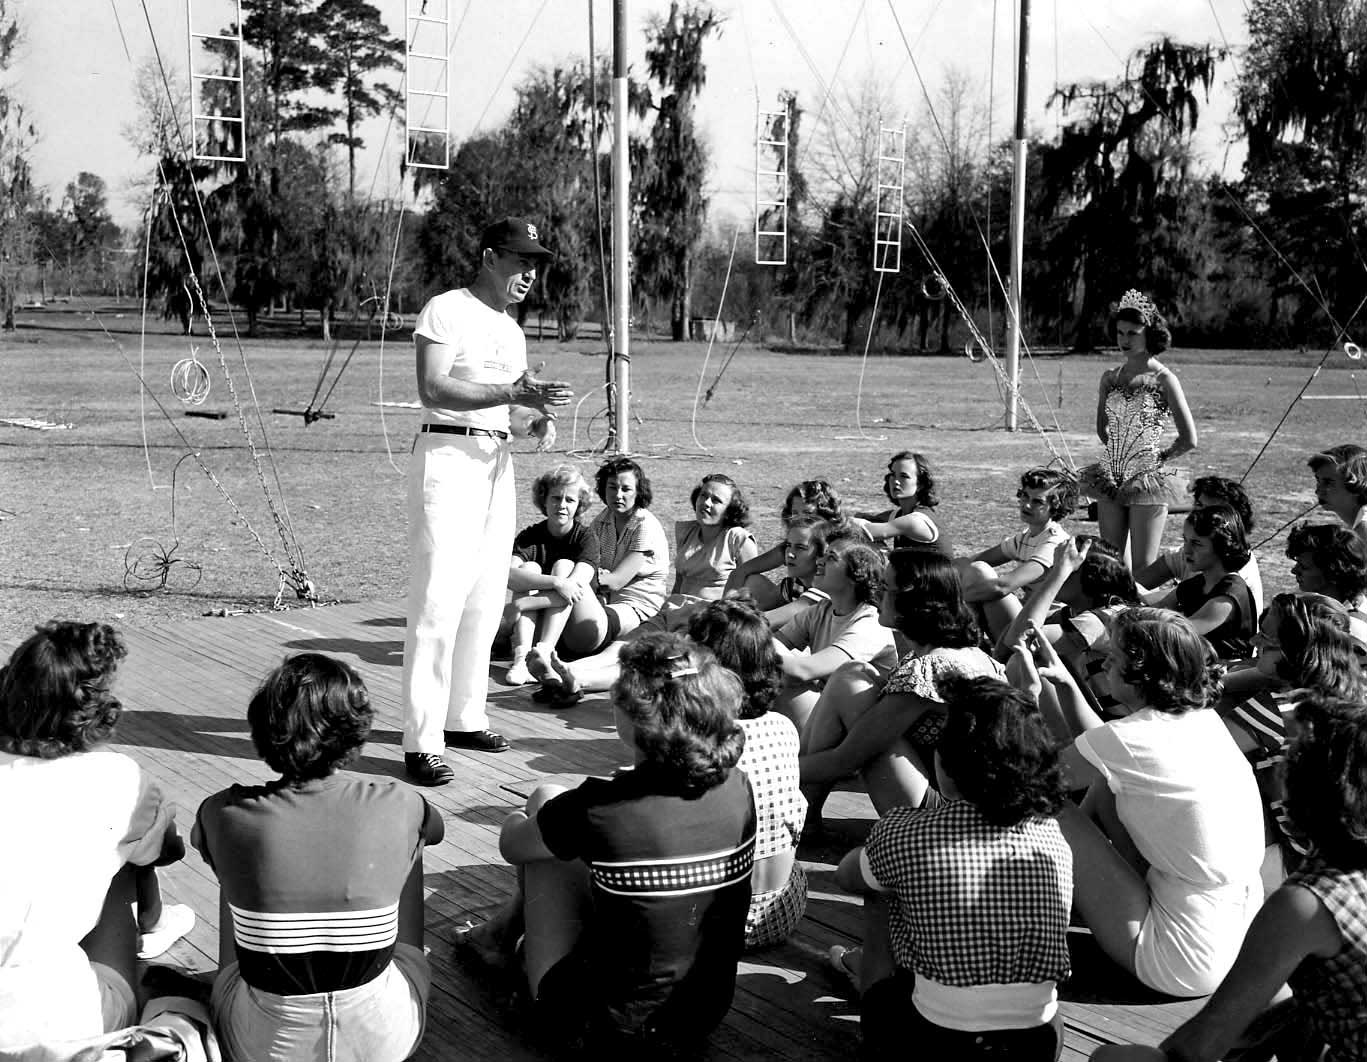 Jack Haskin, founder of the FSU Flying High Circus, teaches students at a practice in 1951. (FSU Special Collections & Archives)